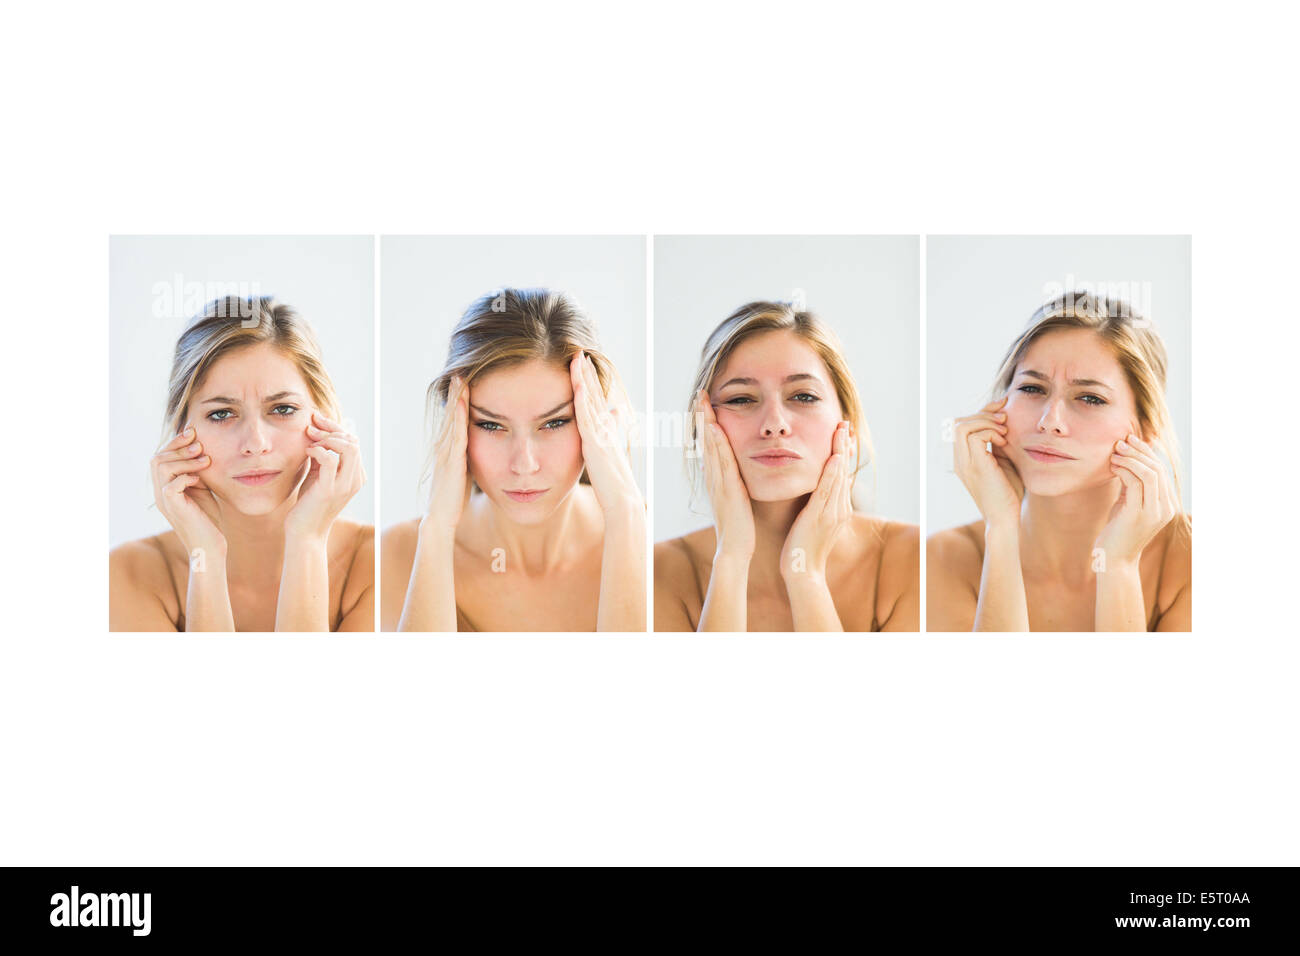 Woman stretching the skin of her face. Stock Photo